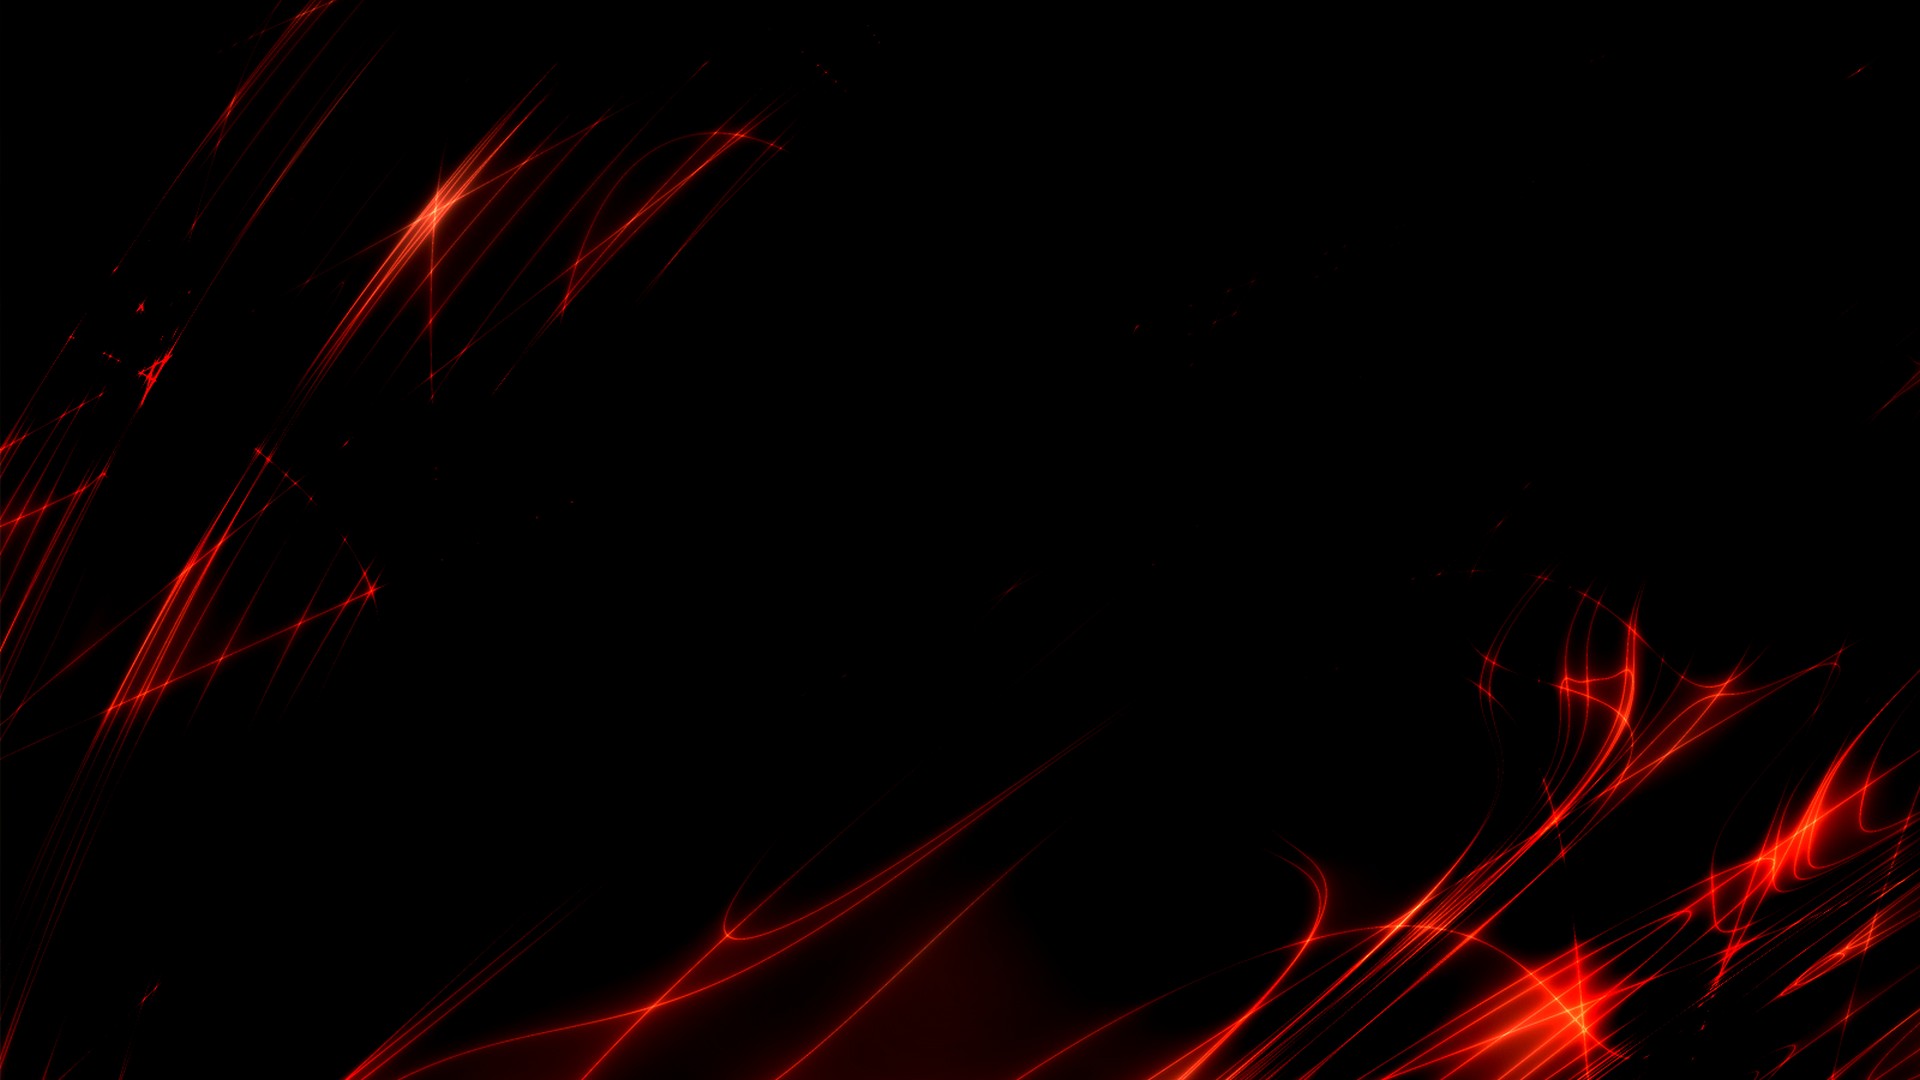 Wallpaper HD Black and Red | 2020 Live Wallpaper HD